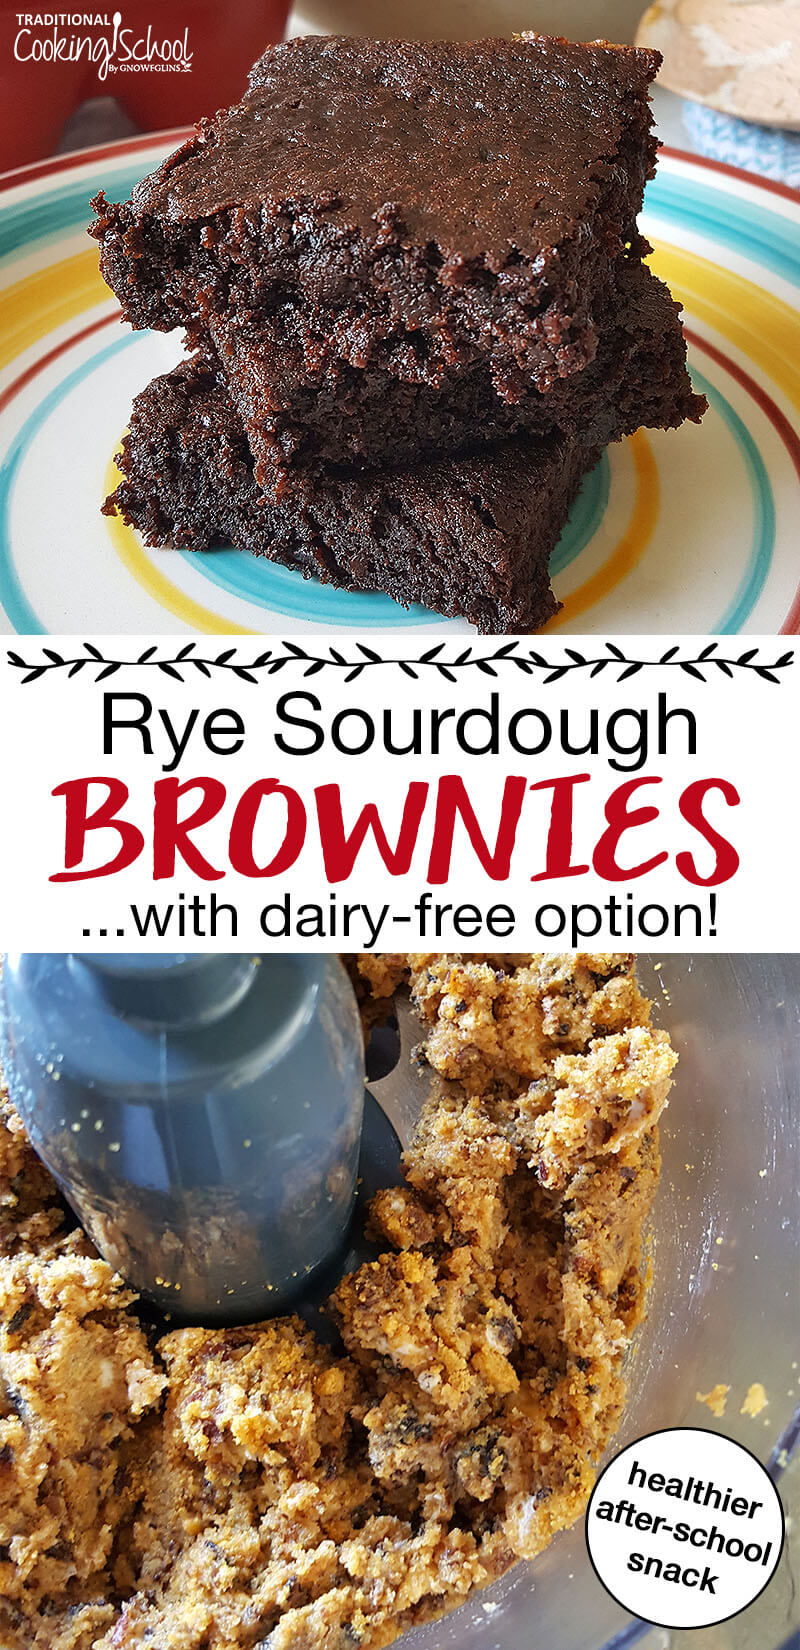 photo collage of sourdough brownies and mixing up the brownie batter with text overlay: "Rye Sourdough Brownies...with dairy-free option!"